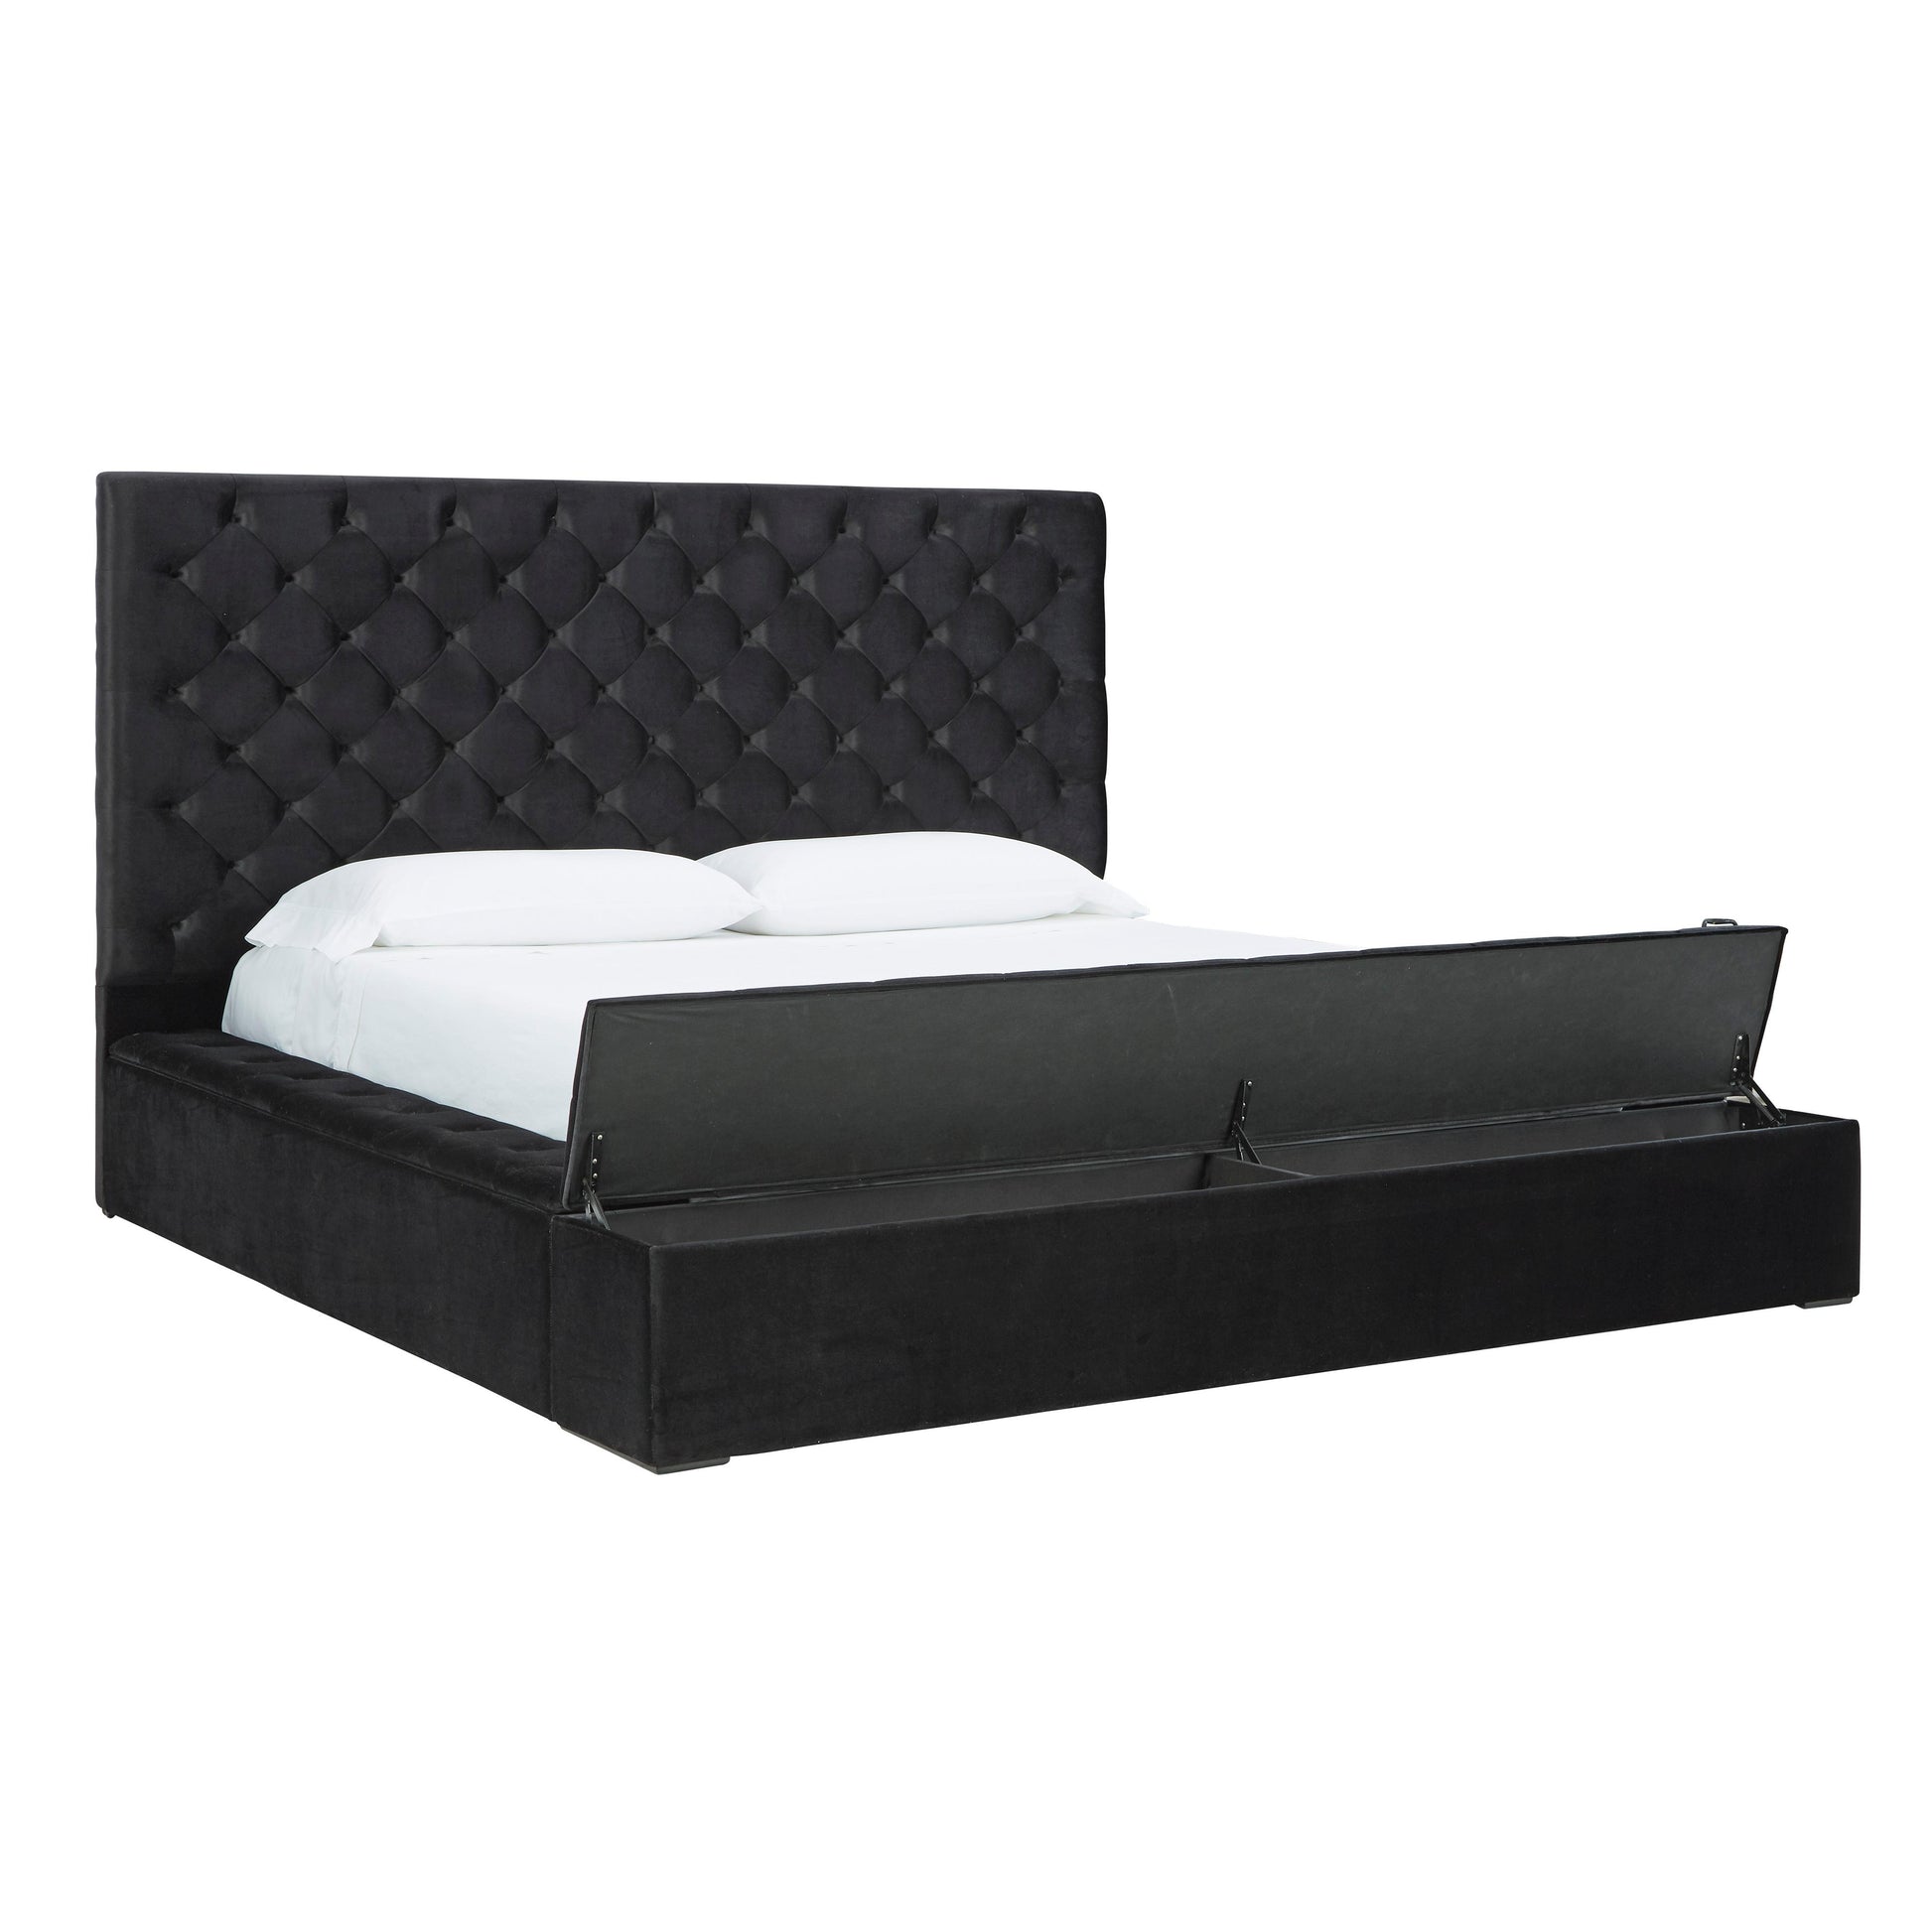 Signature Design by Ashley Lindenfield California King Upholstered Platform Bed with Storage B758-158/B758-156/B758-194 IMAGE 2